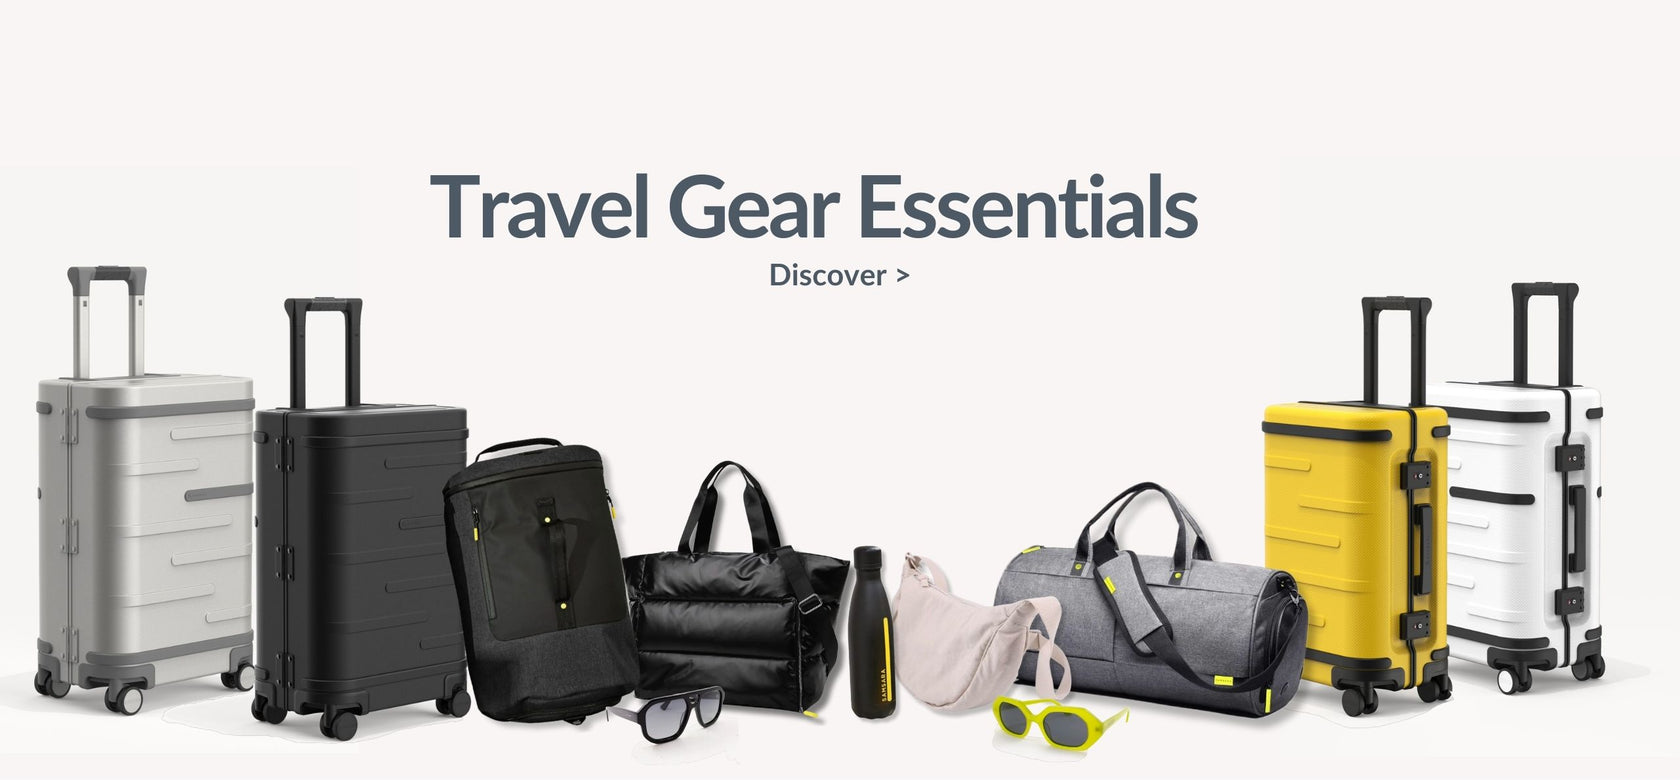 Luggage, Suitcases, Bags and Travel Accessories